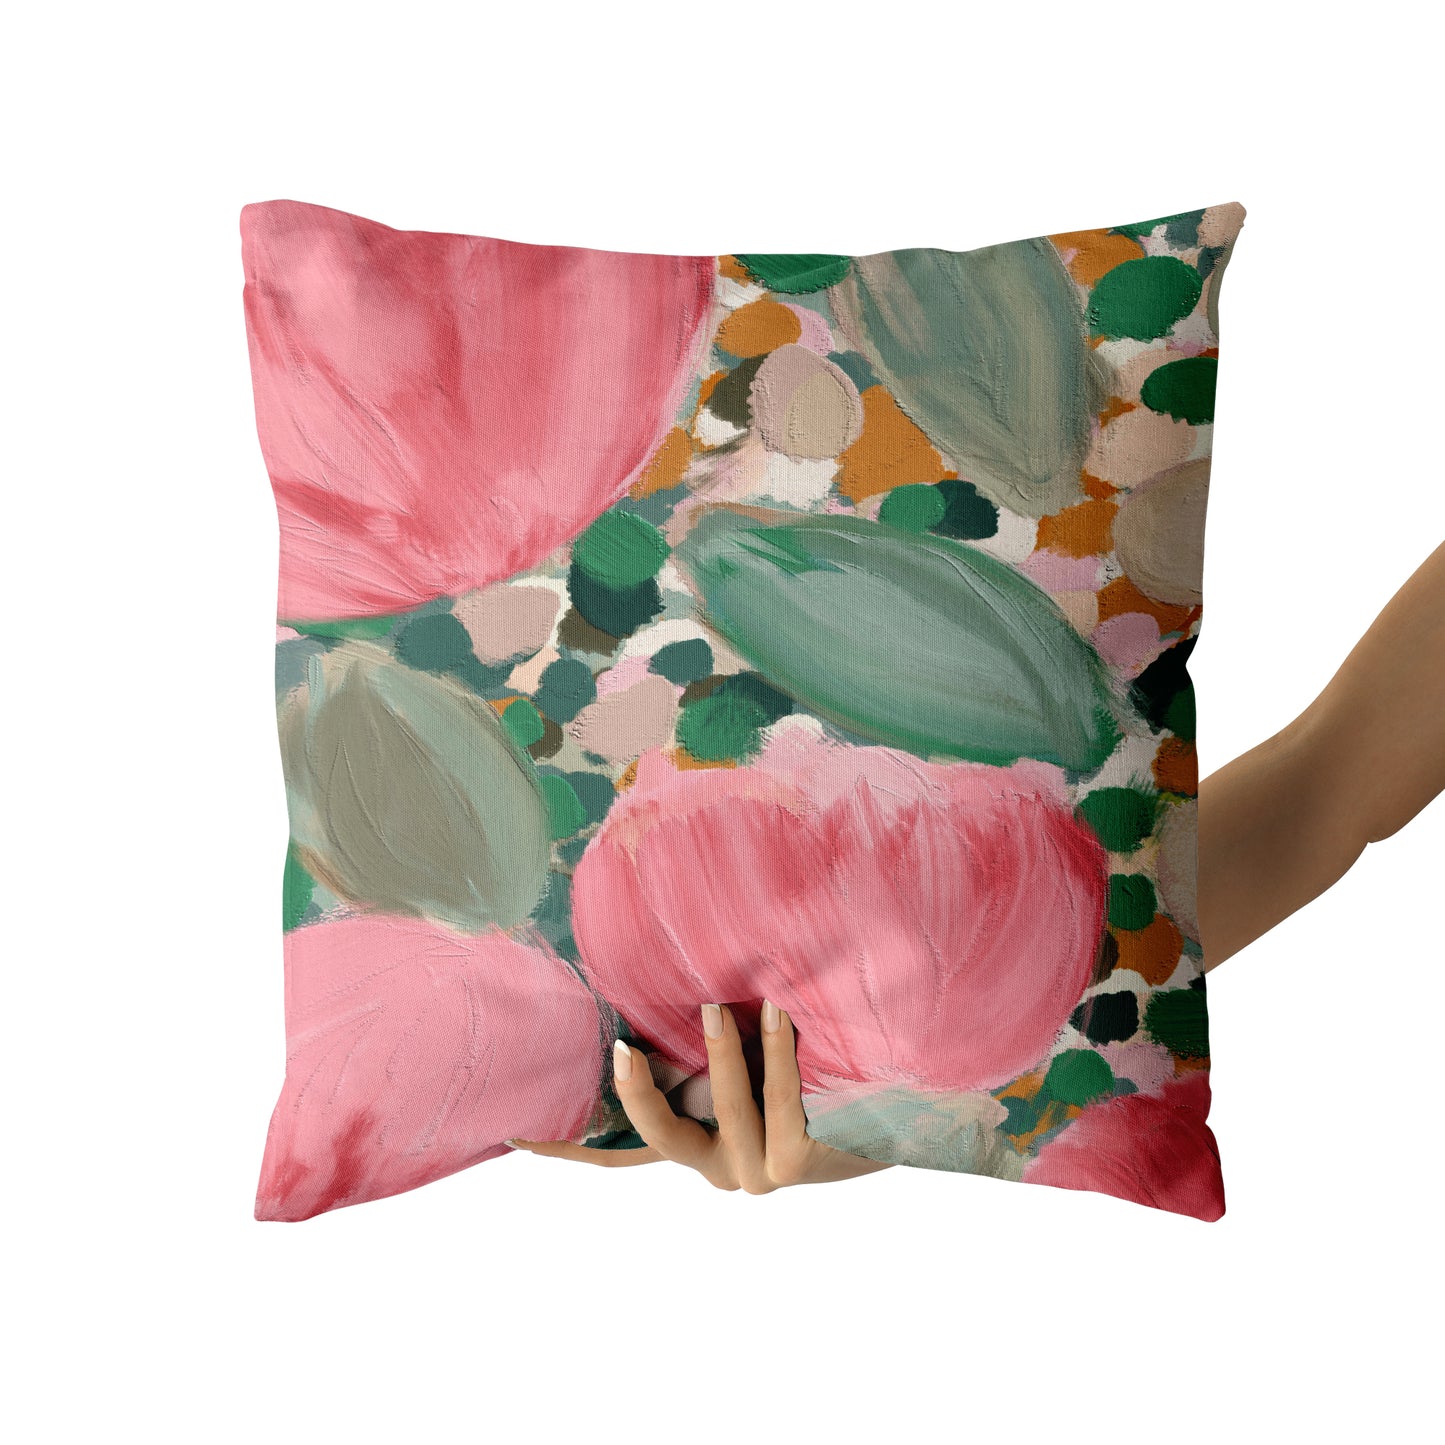 Painted Le Jardin Artistic Throw Pillow